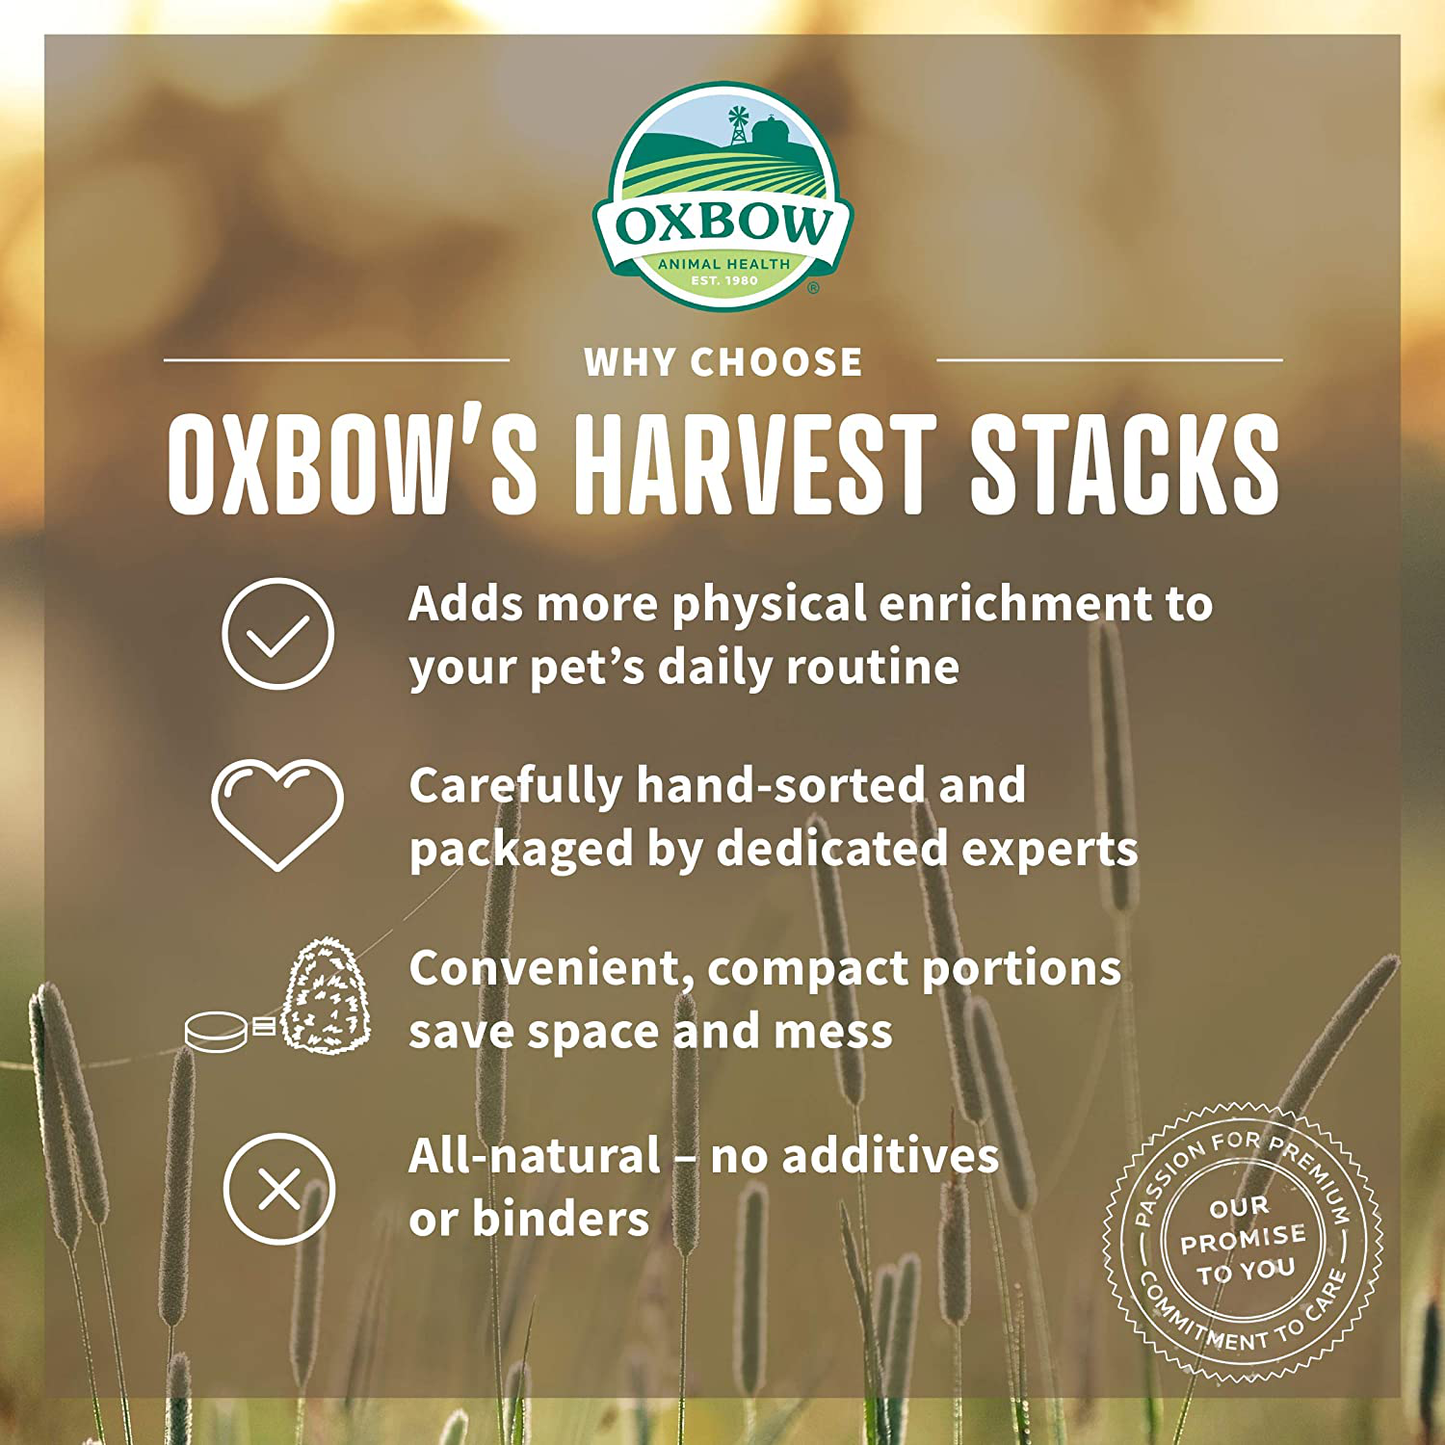 Oxbow Animal Health Harvest Hay Stacks - Western Timothy Hay - All Natural Hay for Small Pets - 35 Oz.